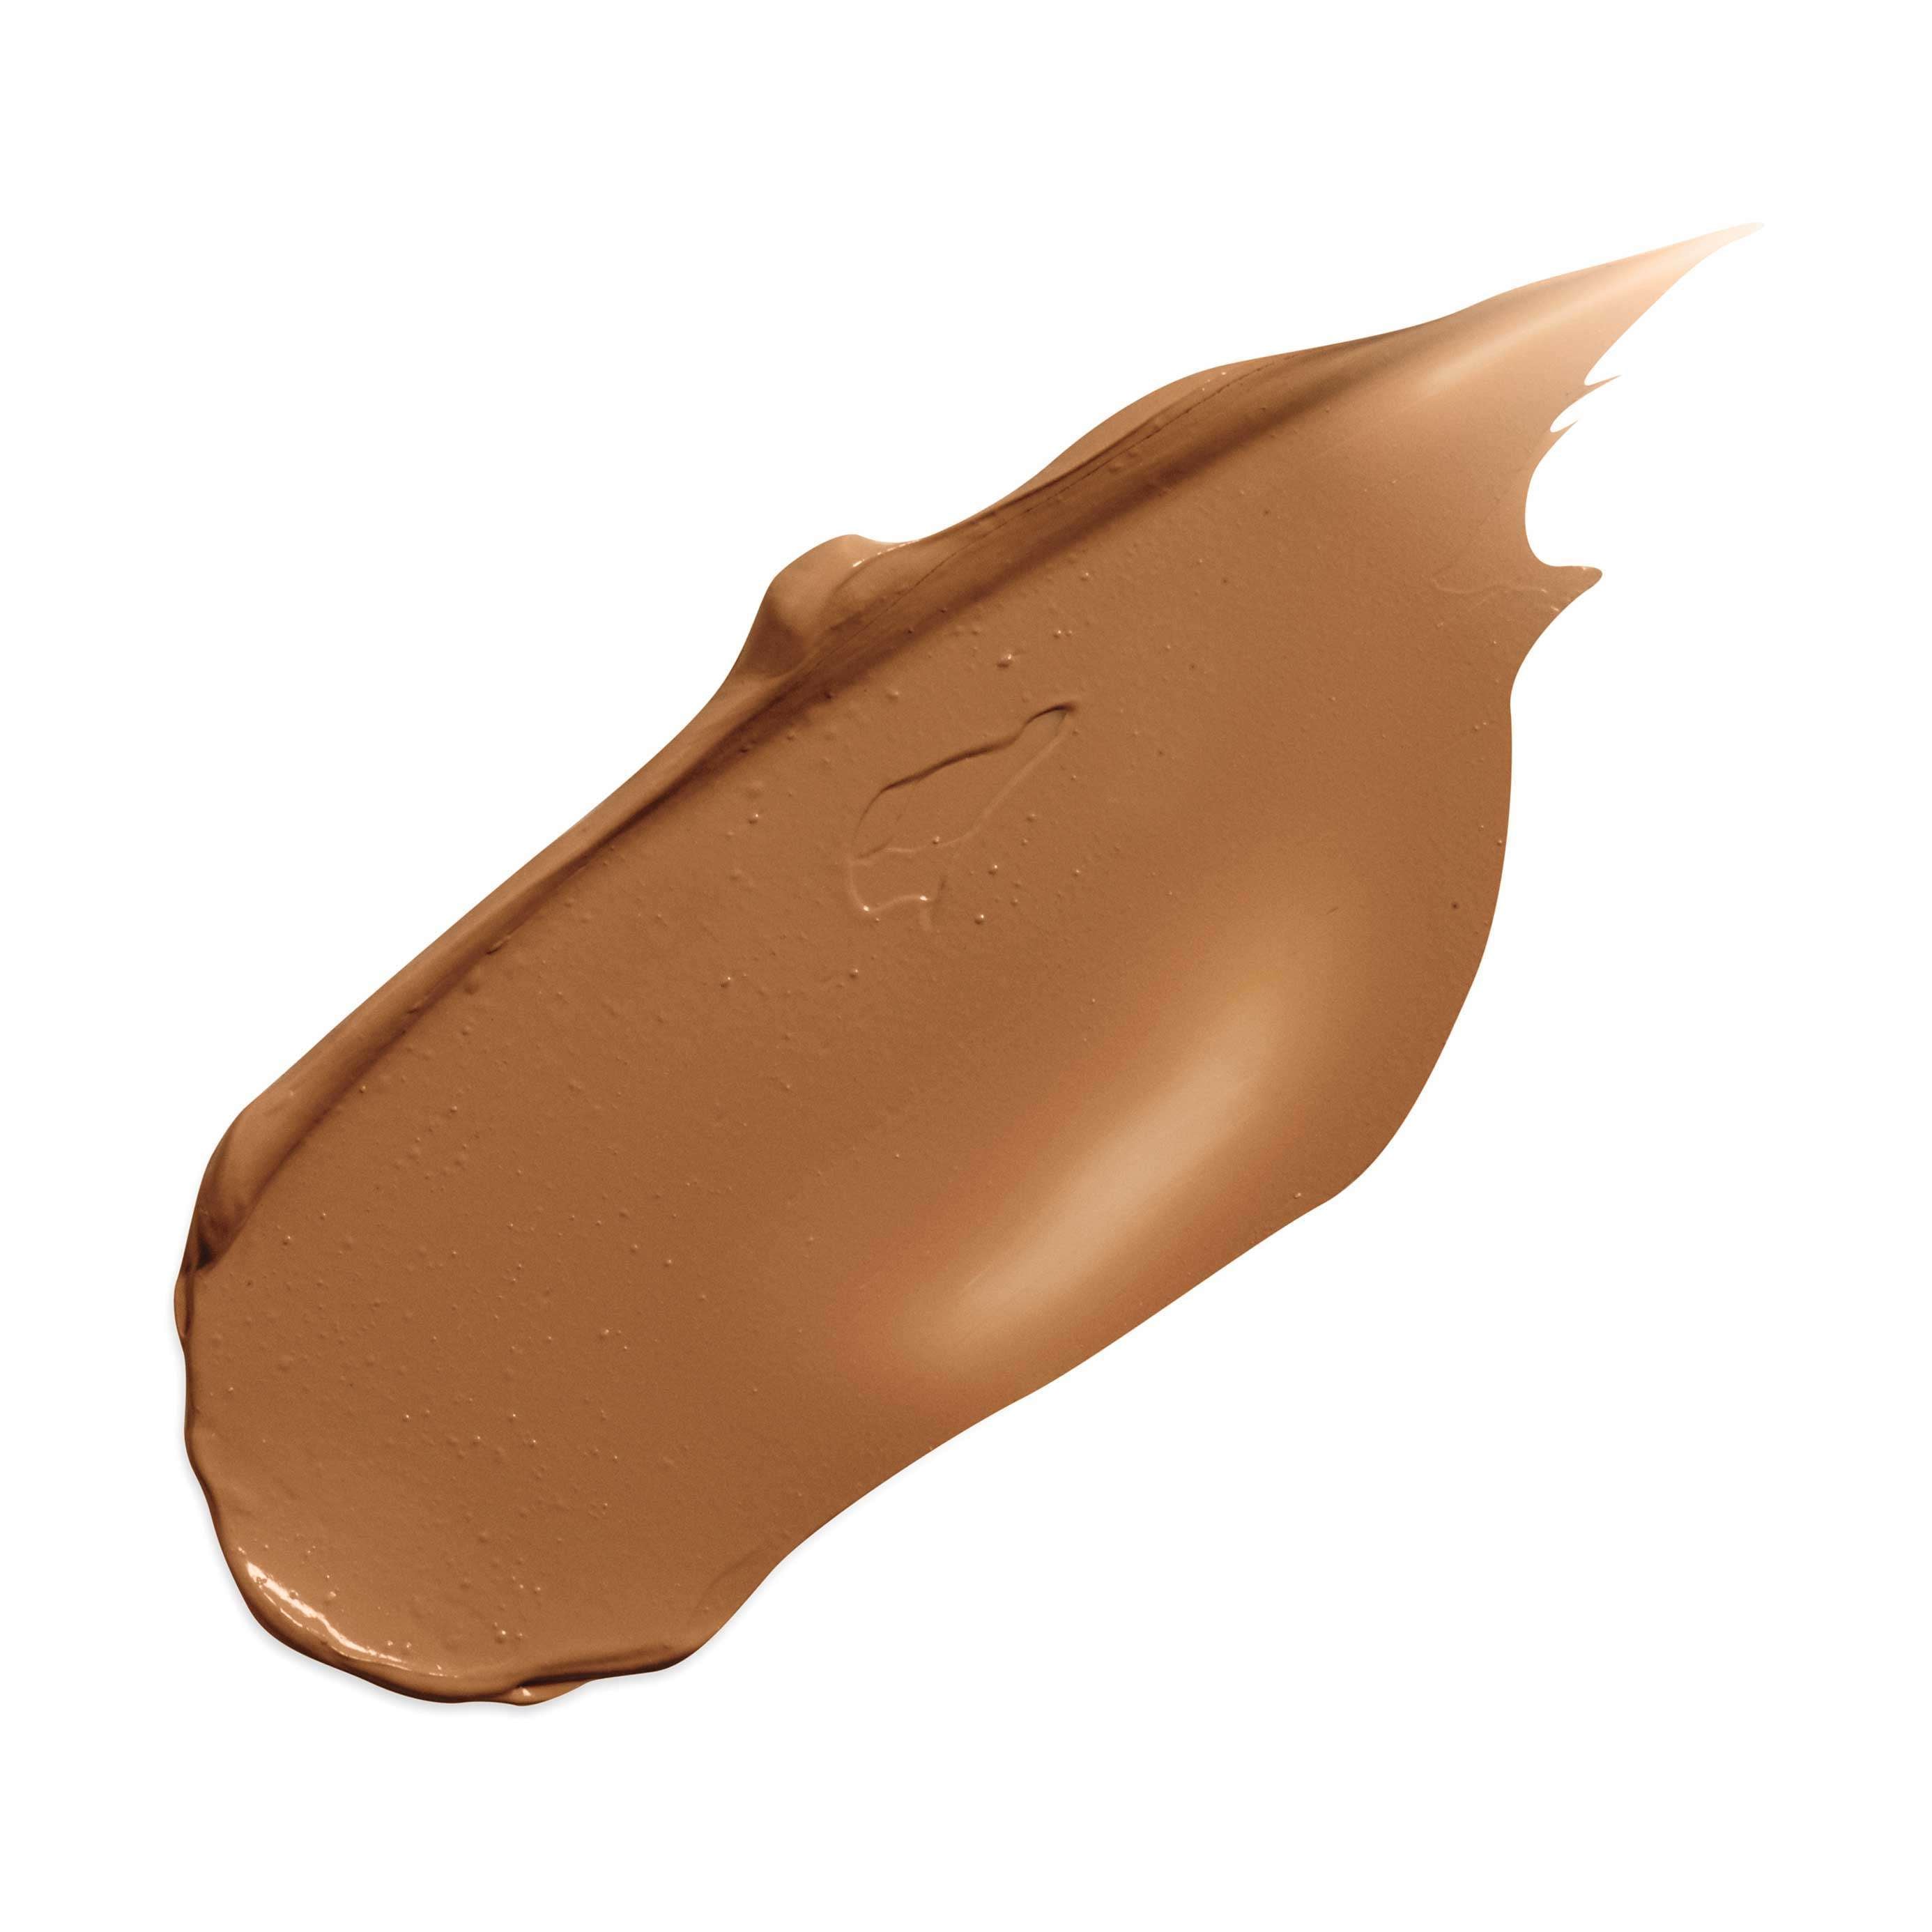 Jane Iredale Disappear™ Full Coverage Concealer, Dark Disappear